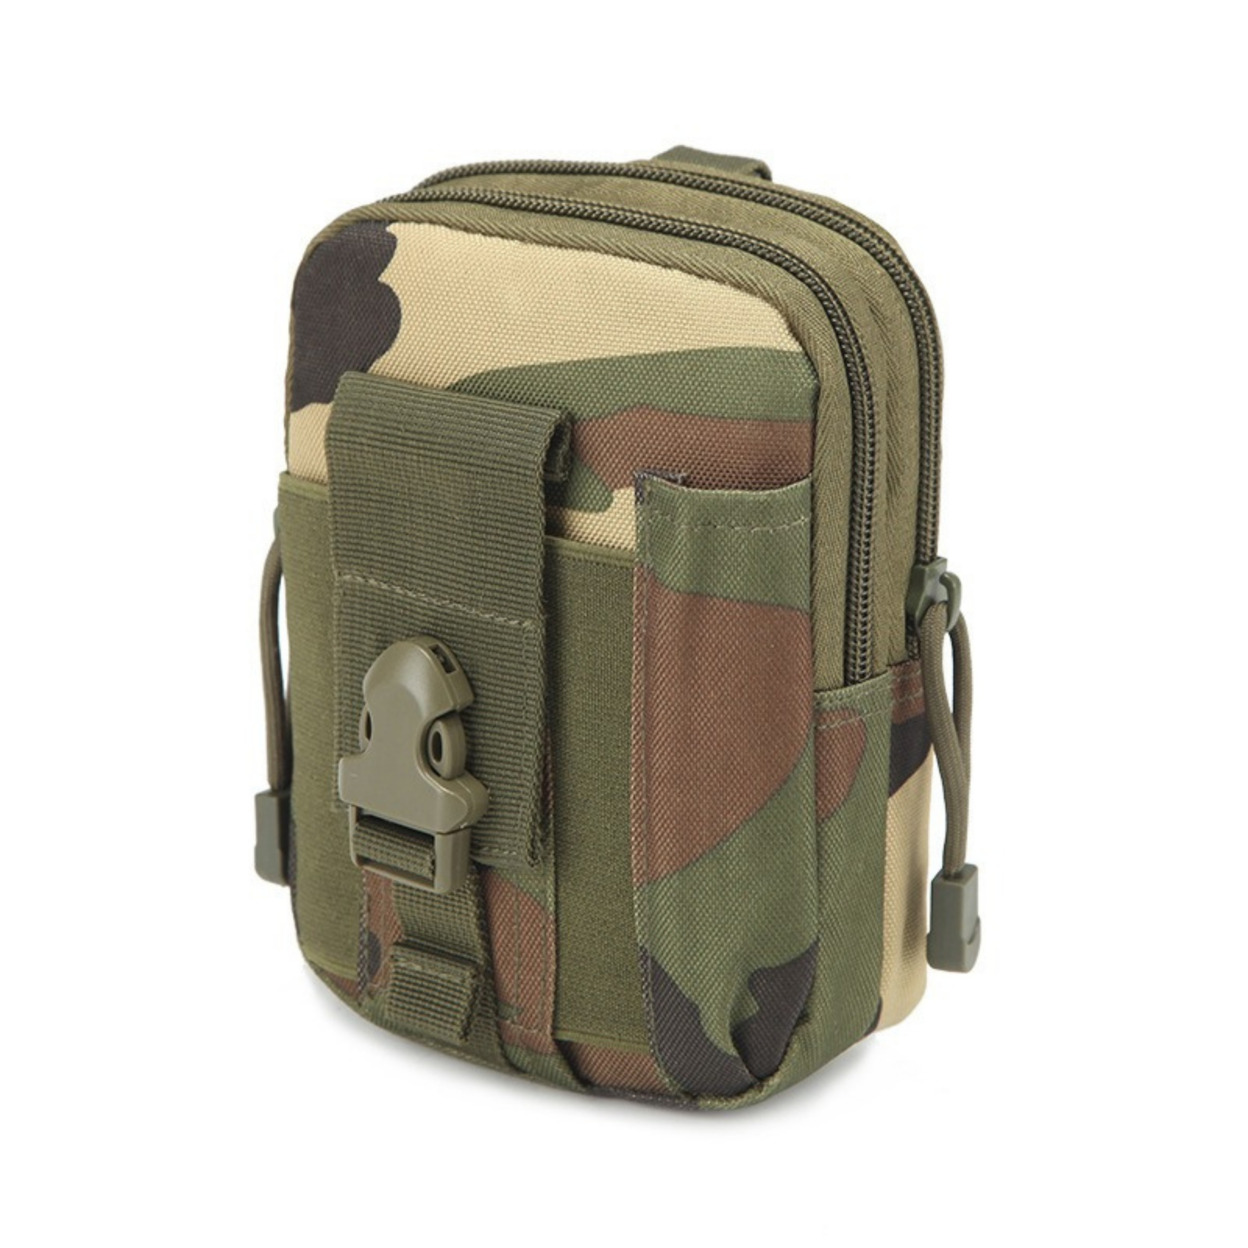 Tactical MOLLE Pouch & Waist Bag For Hiking & Outdoor Activities - Camo